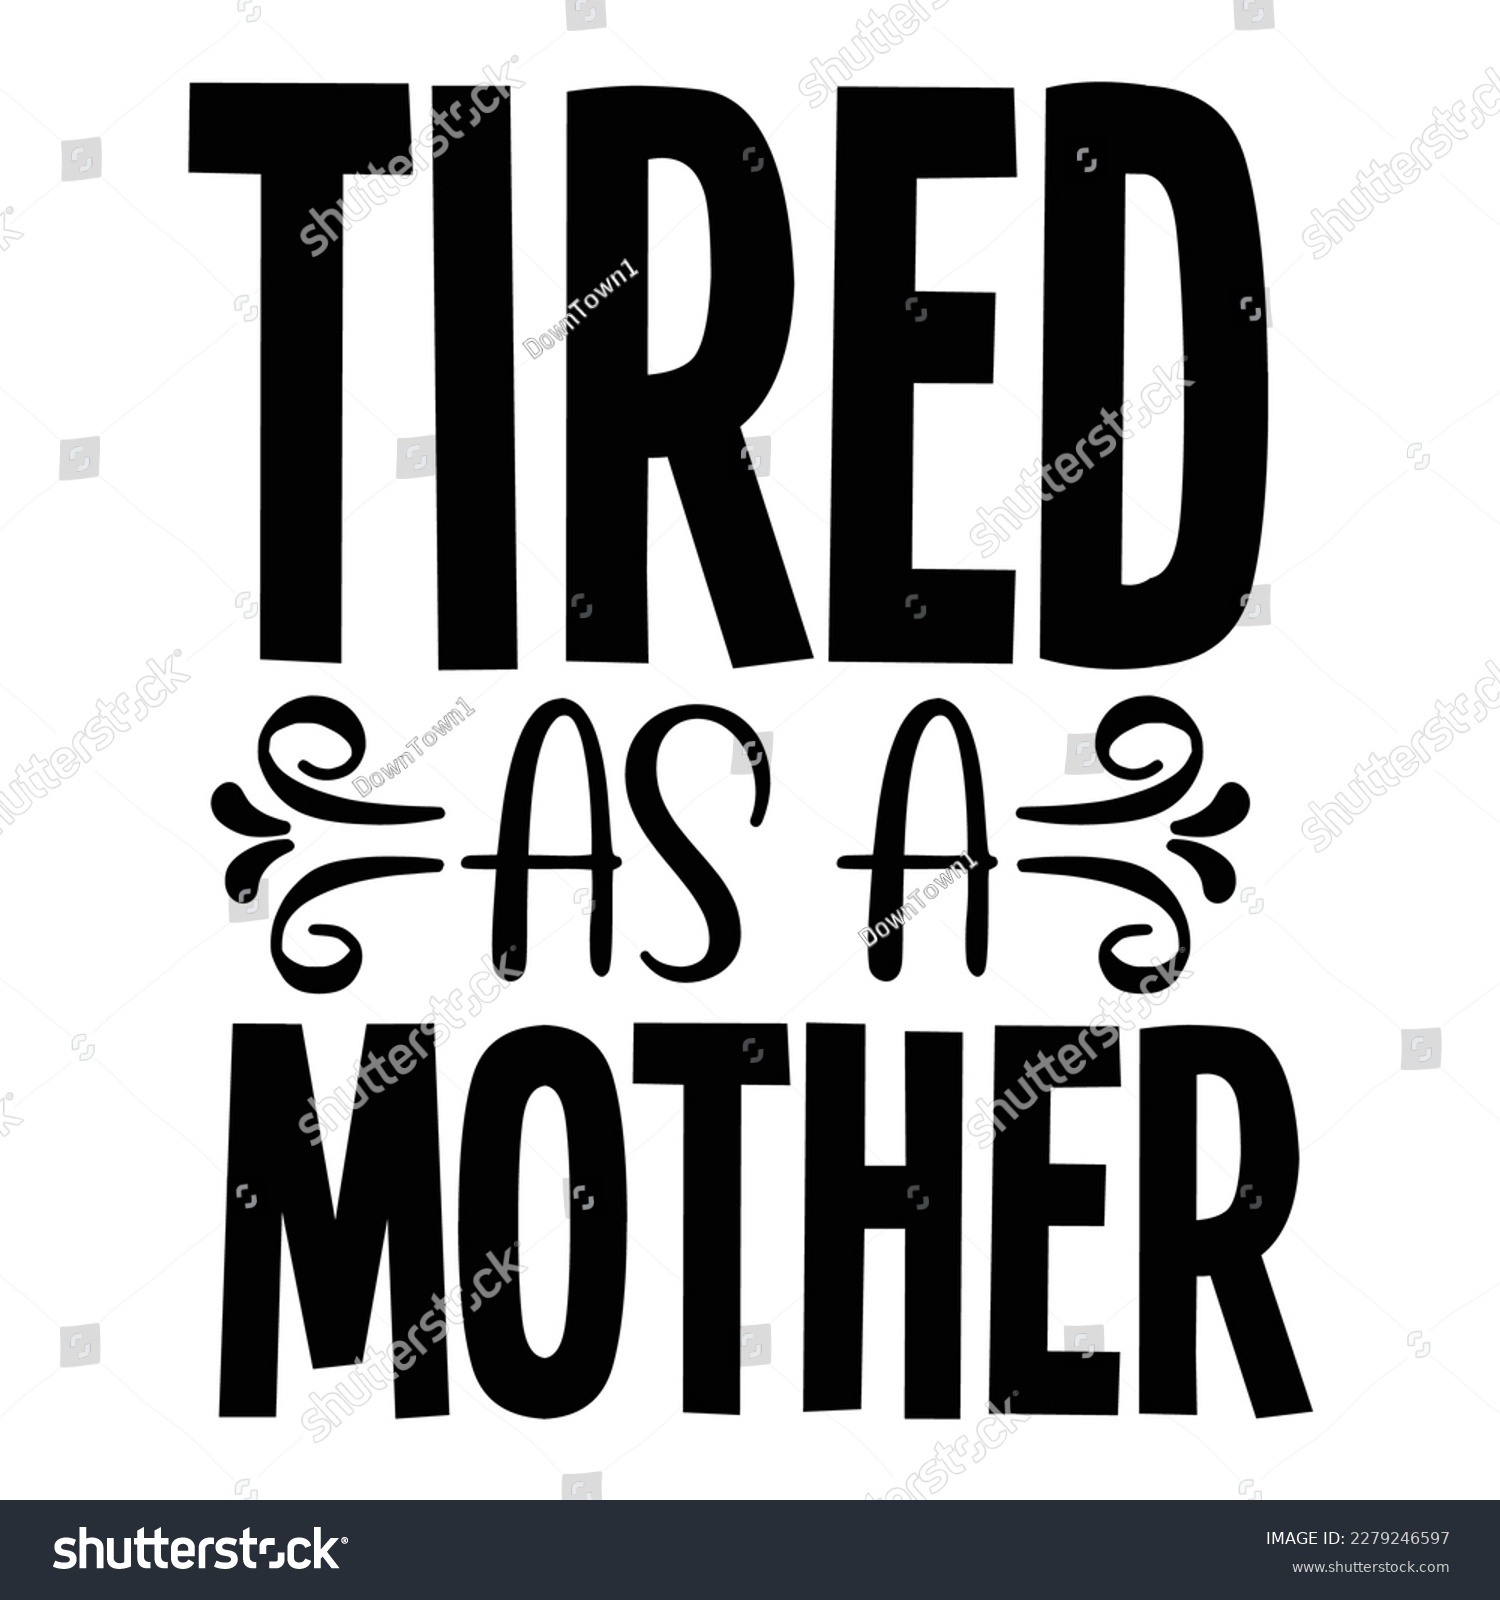 SVG of Tired As A Mother Super Mom, Super Wife, Super Tired. Mother- Mother's Day T-Shirt Design, Posters, Greeting Cards, Textiles, and Sticker Vector Illustration svg